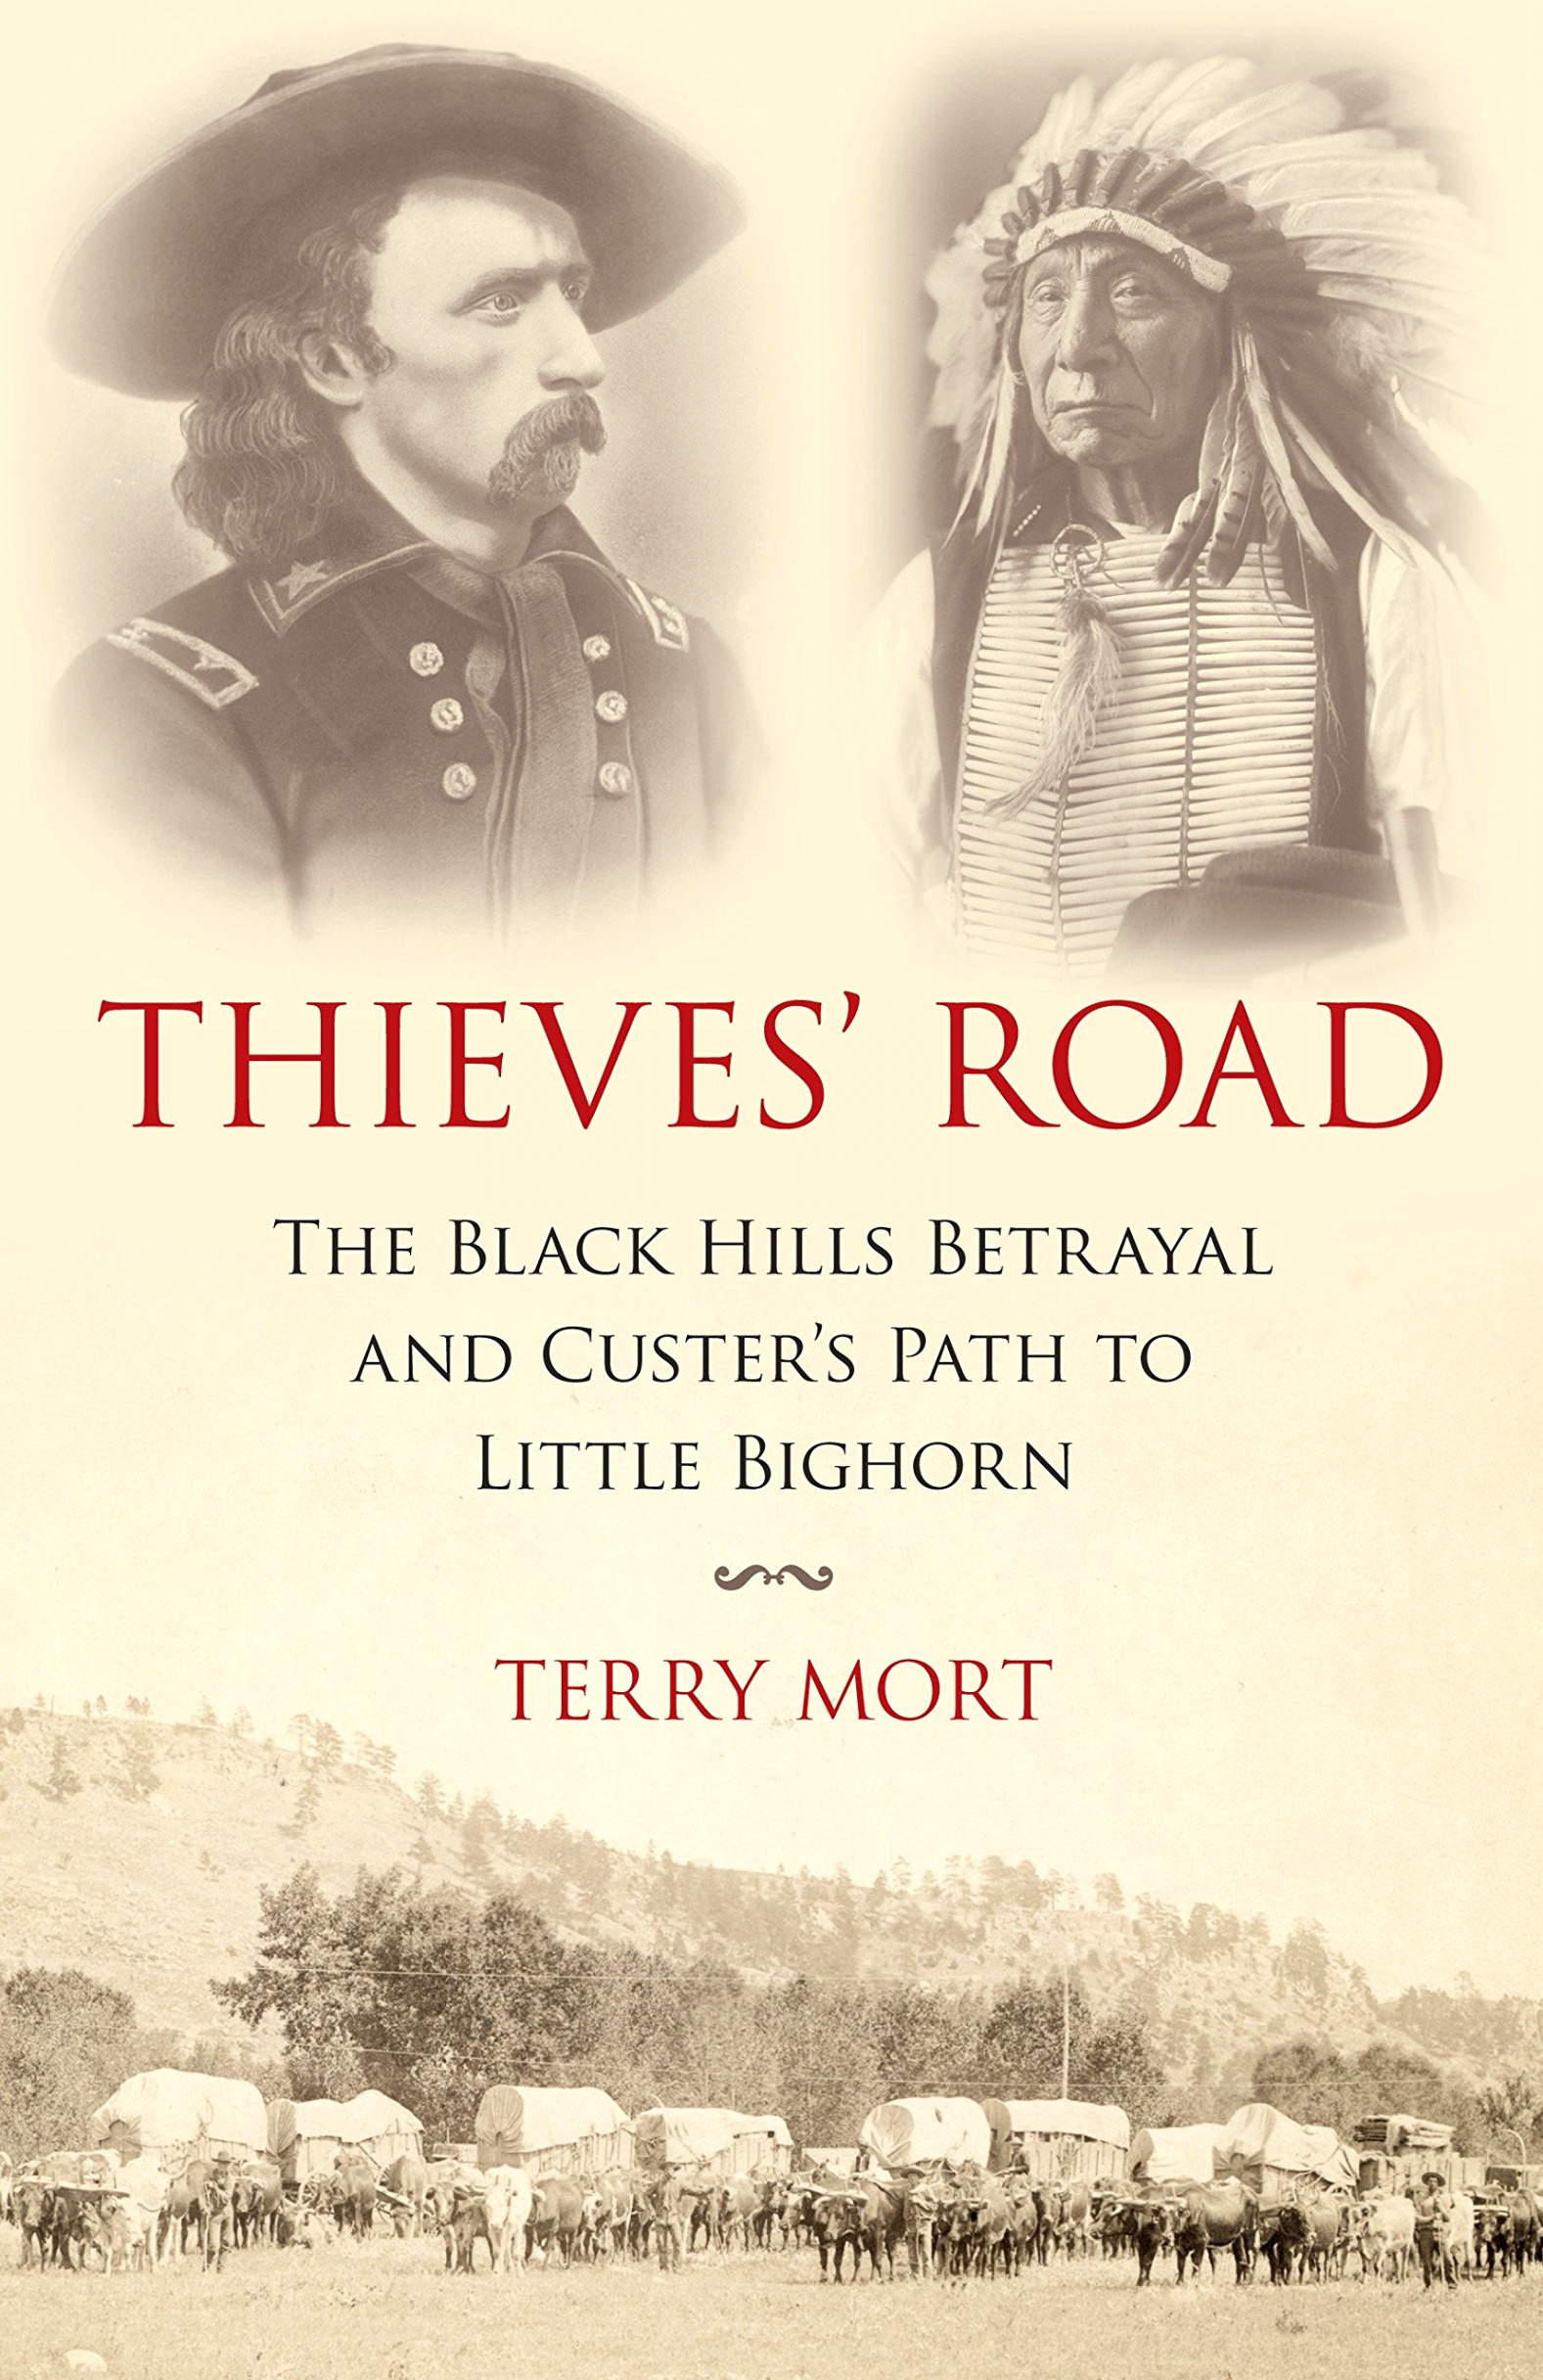 Car Accident Lawyer In Custer Ok Dans Thieves' Road: the Black Hills Betrayal and Custer's Path to Little Bighorn